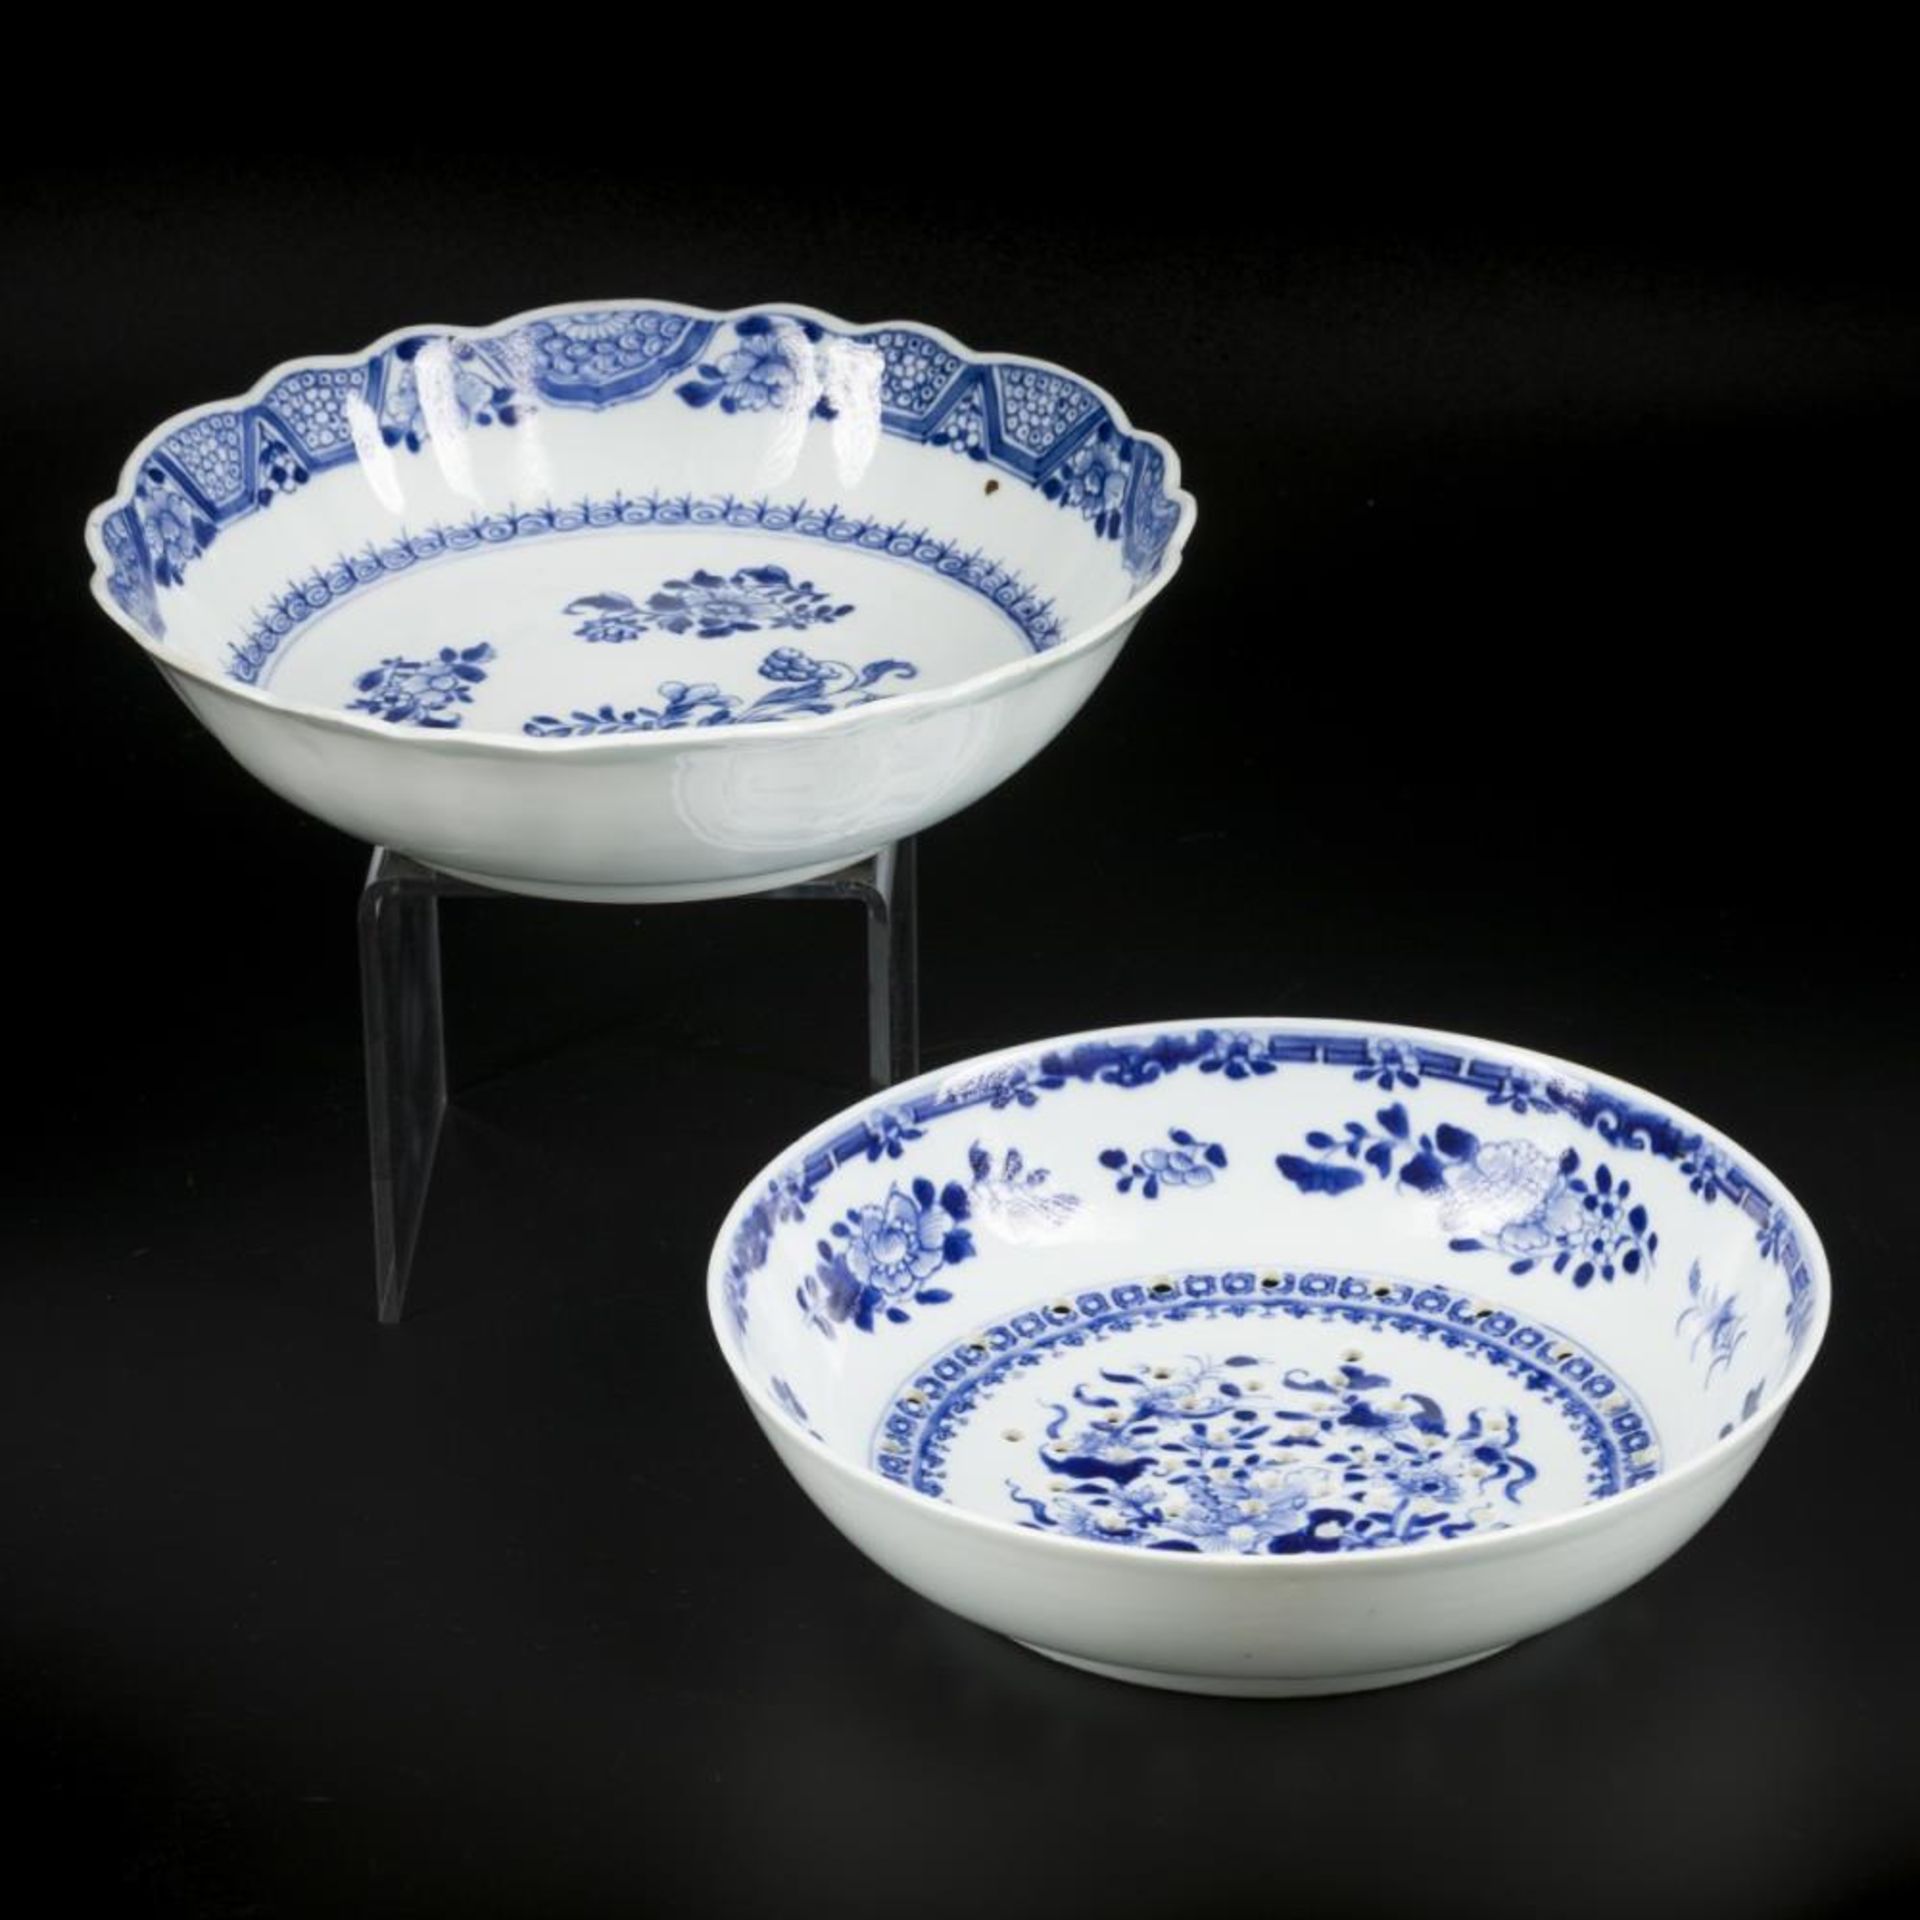 A porcelain bowl and a colander, both with floral decoration China, Qianlong 18th century.